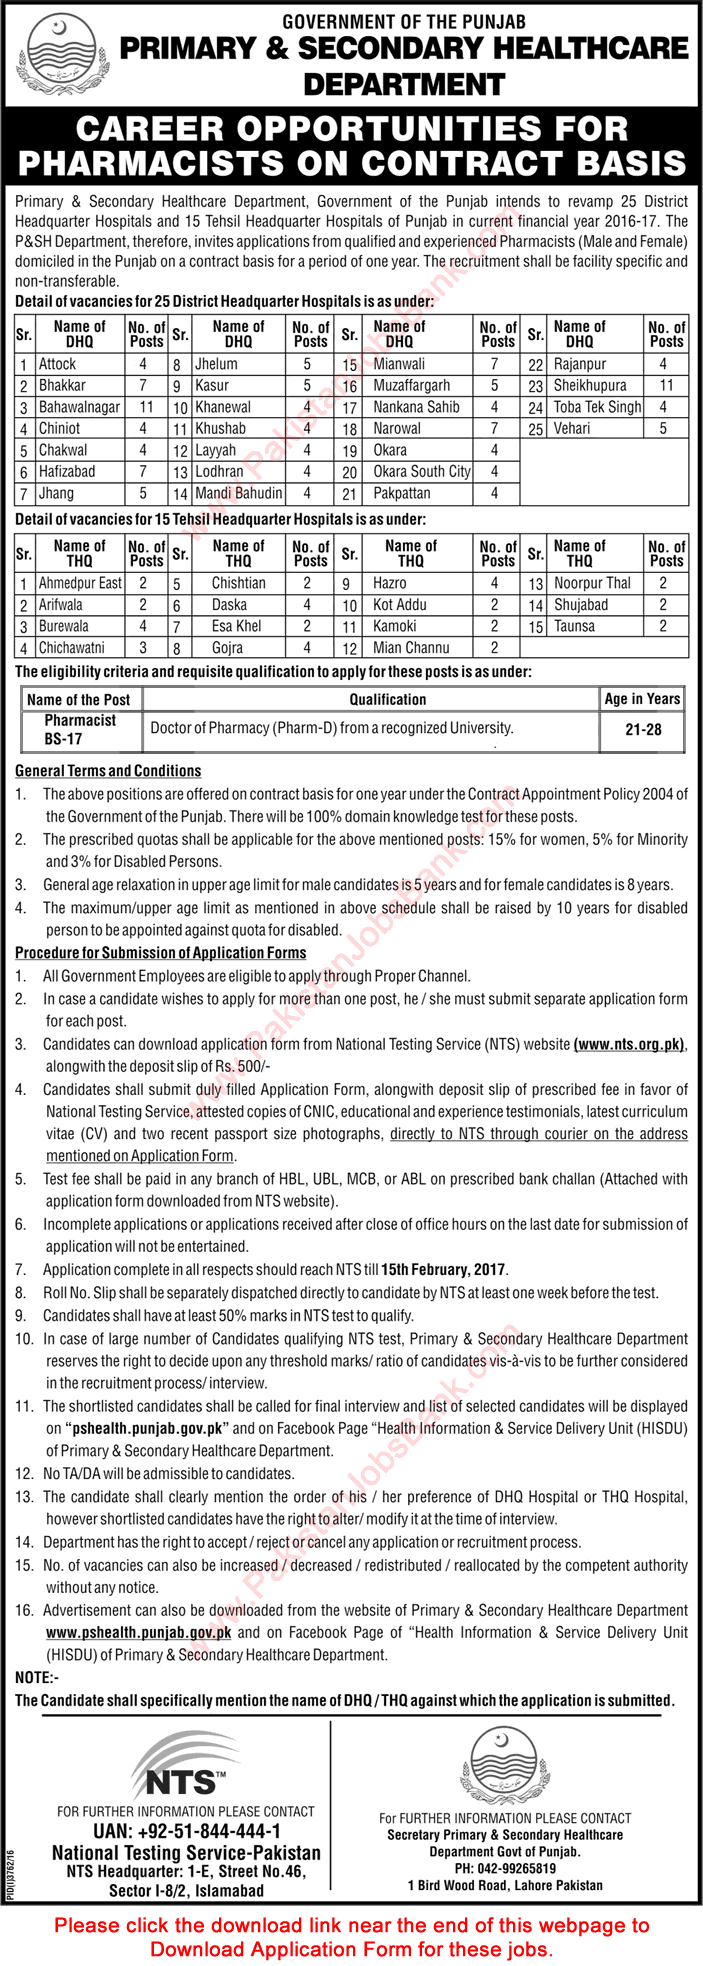 Pharmacist Jobs in Primary and Secondary Healthcare Department Punjab 2017 NTS Application Form Download Latest